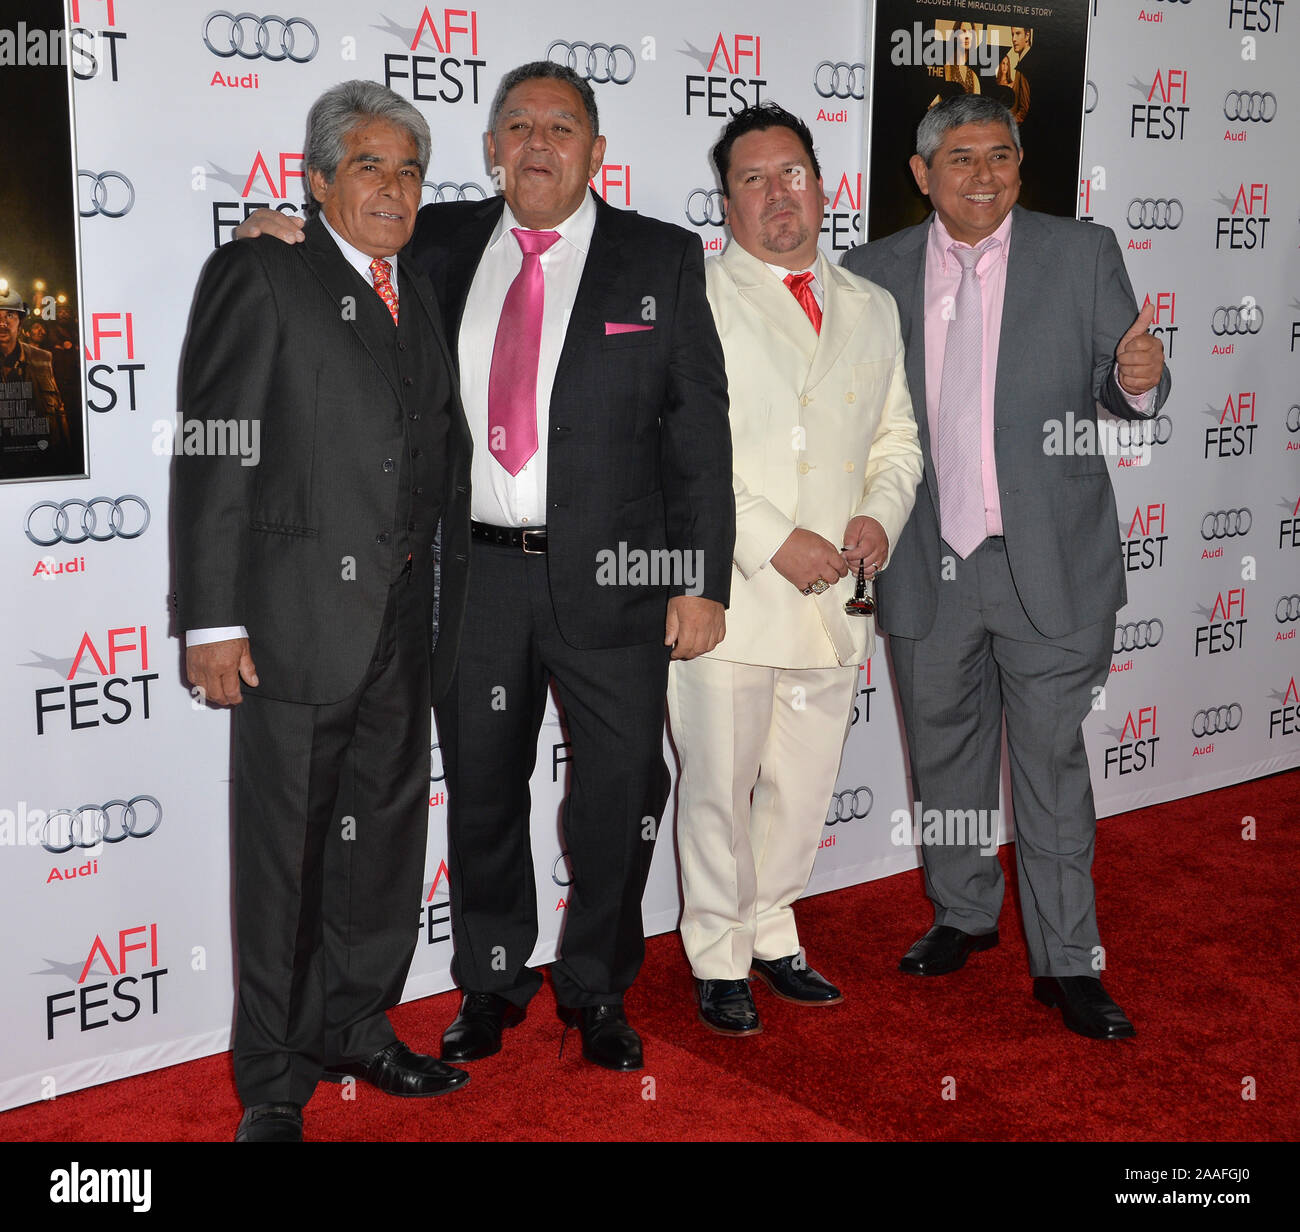 LOS ANGELES, CA - NOVEMBER 9, 2015: Chilean miners Mario Gomez, Luis Urzua, Edison Pena & Juan Carlos Aguilar at the premiere of 'The 33', part of the AFI FEST 2015, at the TCL Chinese Theatre © 2015 Paul Smith / Featureflash Stock Photo